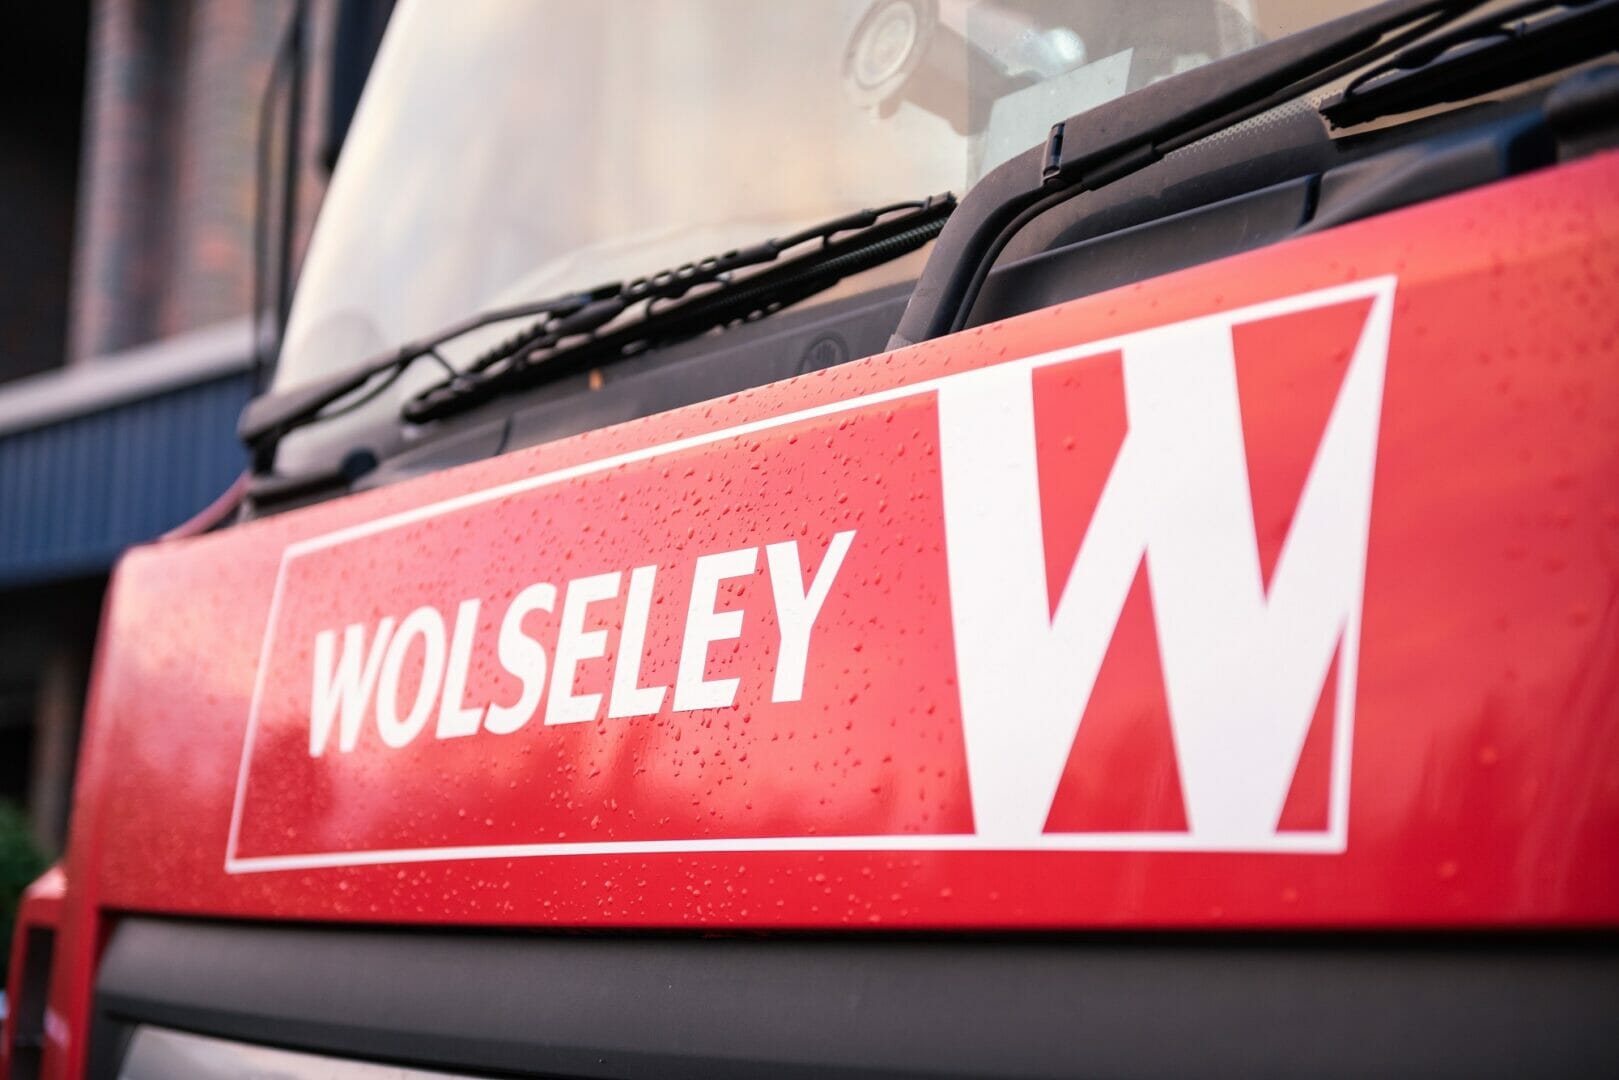 Wolseley vows to support installers in getting back to work as lockdown restrictions ease @WolseleyUK